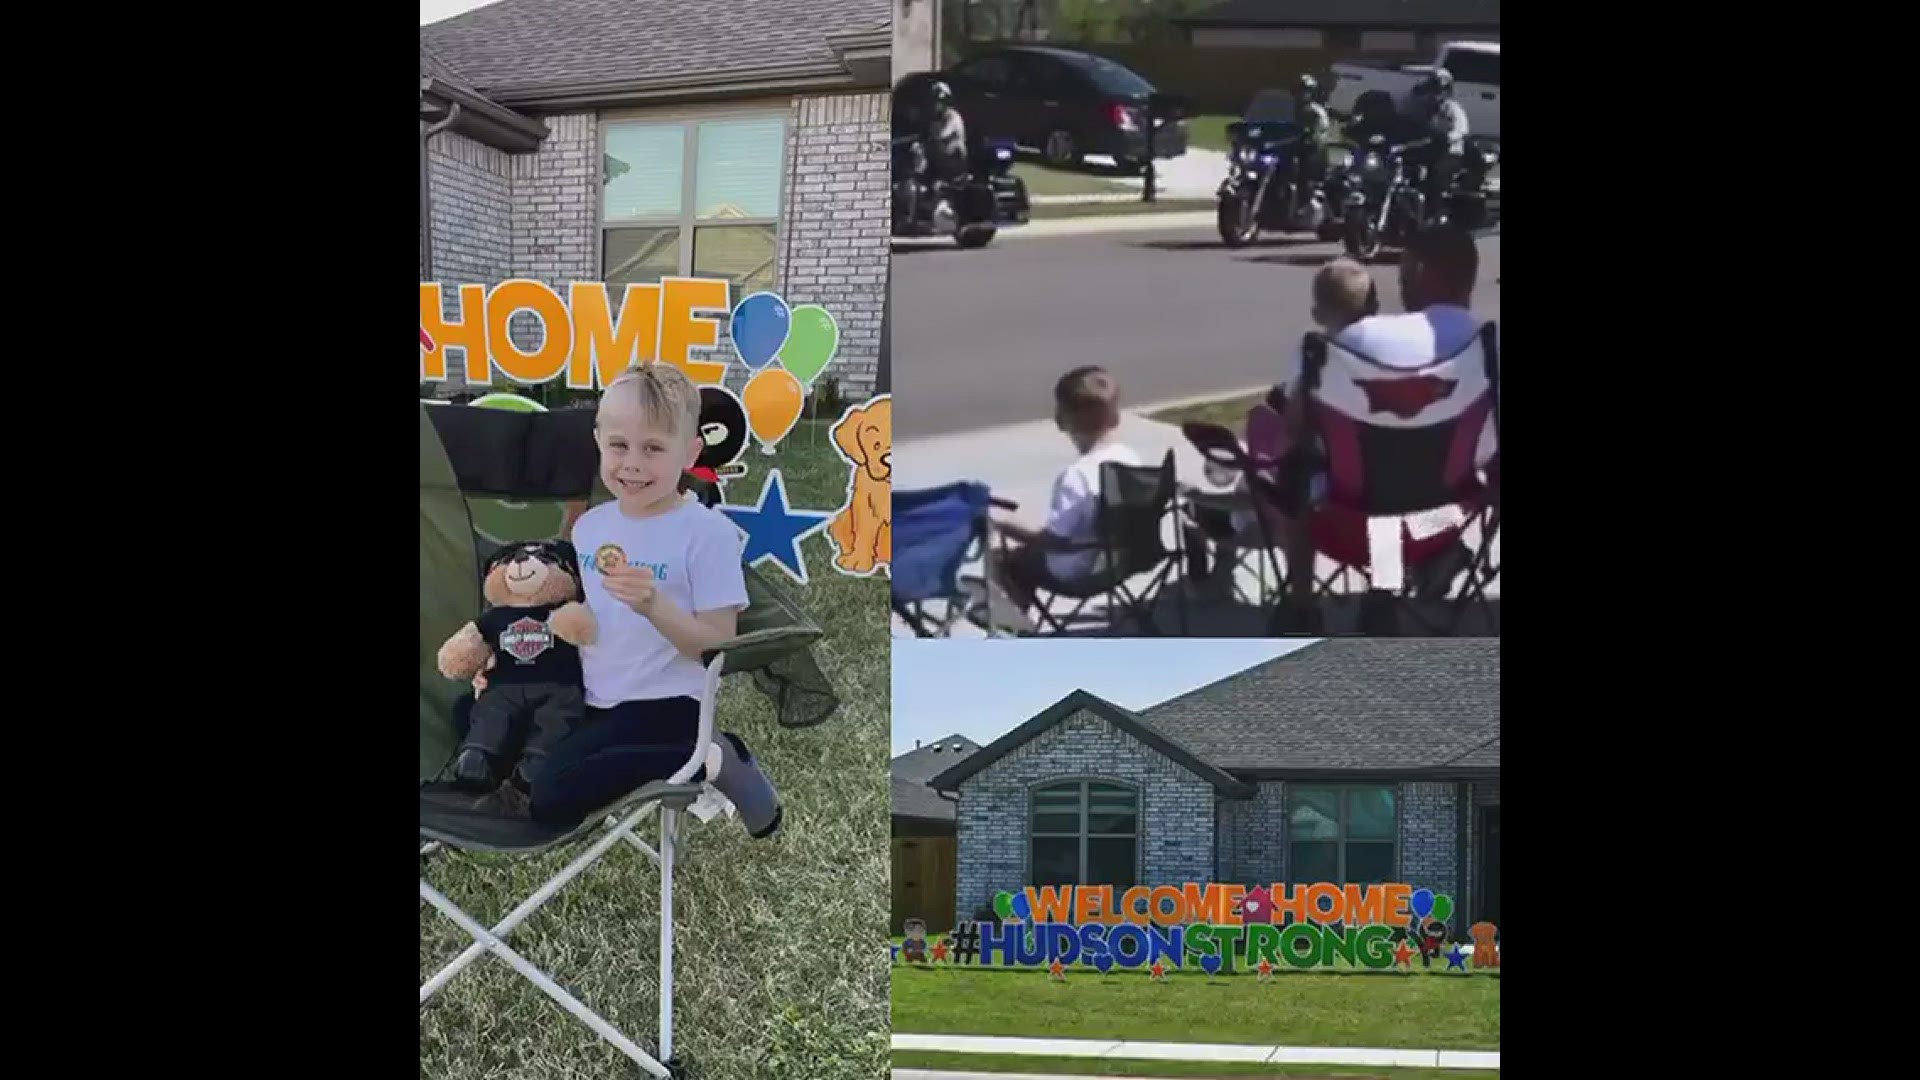 The Benton County Sheriff's Office helped give 6-year-old Hudson a special welcome home after surgery.